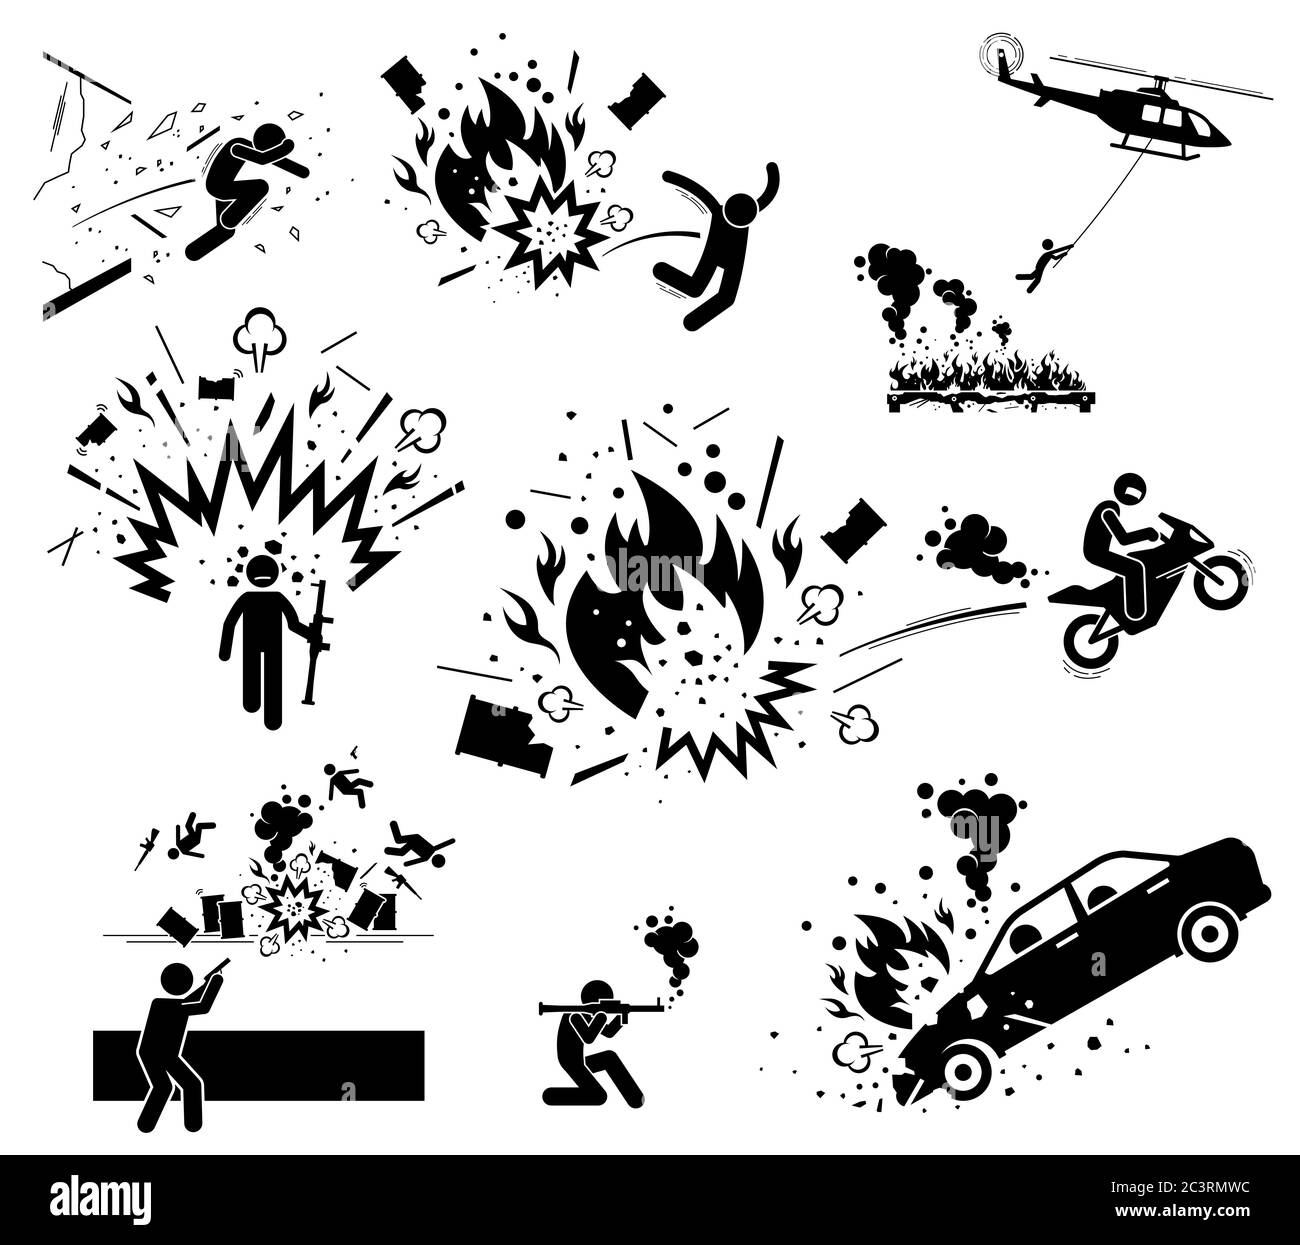 Movie action hero bomb explosion scene. Vector of man escape from bomb explosion with motorcycle, jump away, hang on helicopter, and smash through gla Stock Vector